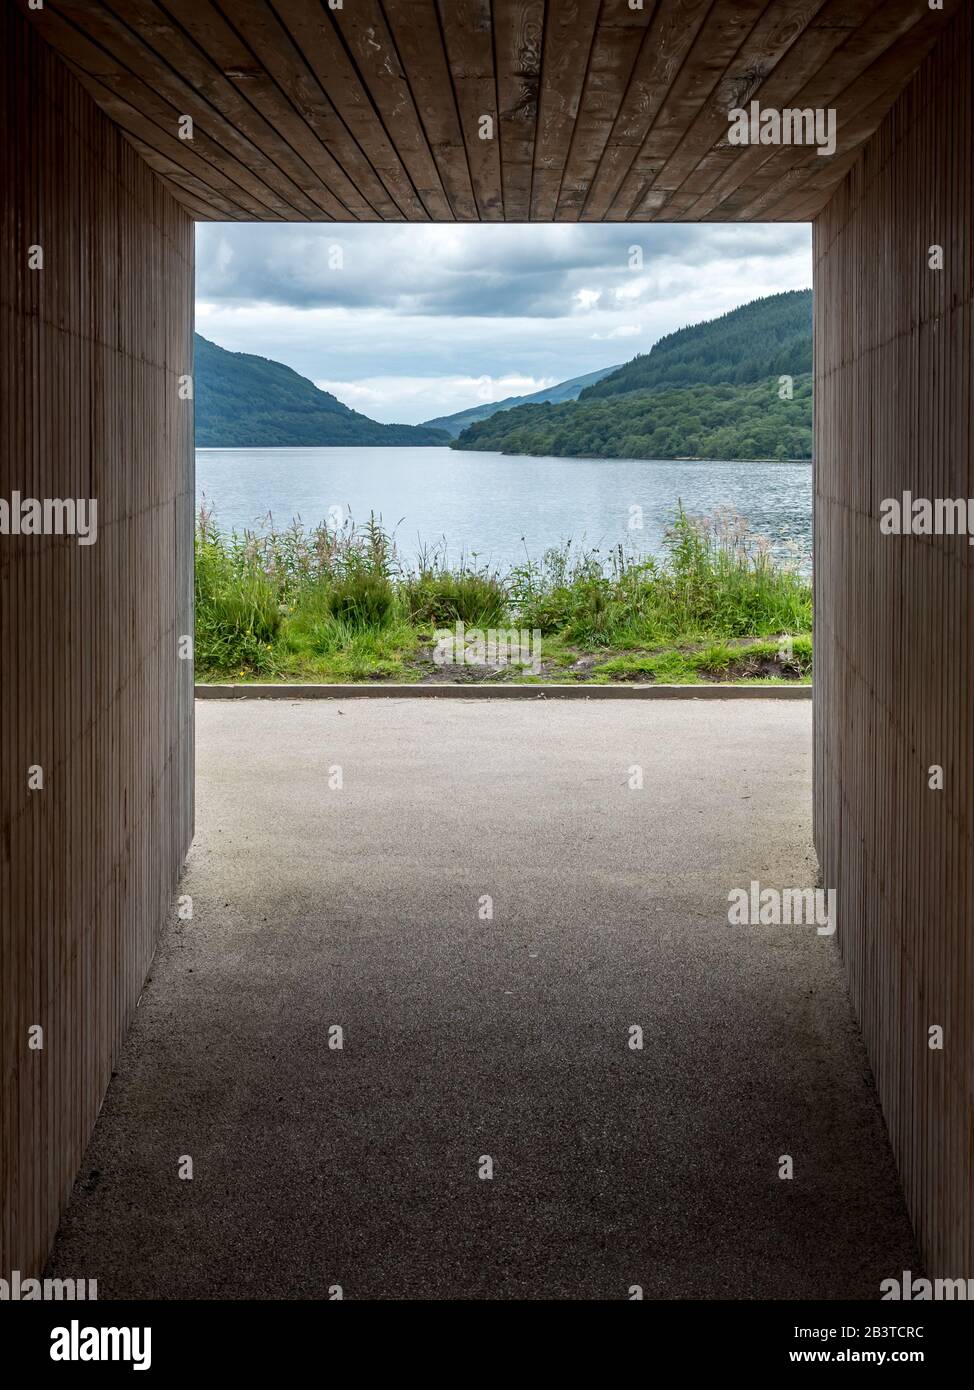 Inveruglas Pyramid viewing platform, Loch Lomond, Scotland. A view of the famous Scottish Loch framed by the viewing platform. Stock Photo